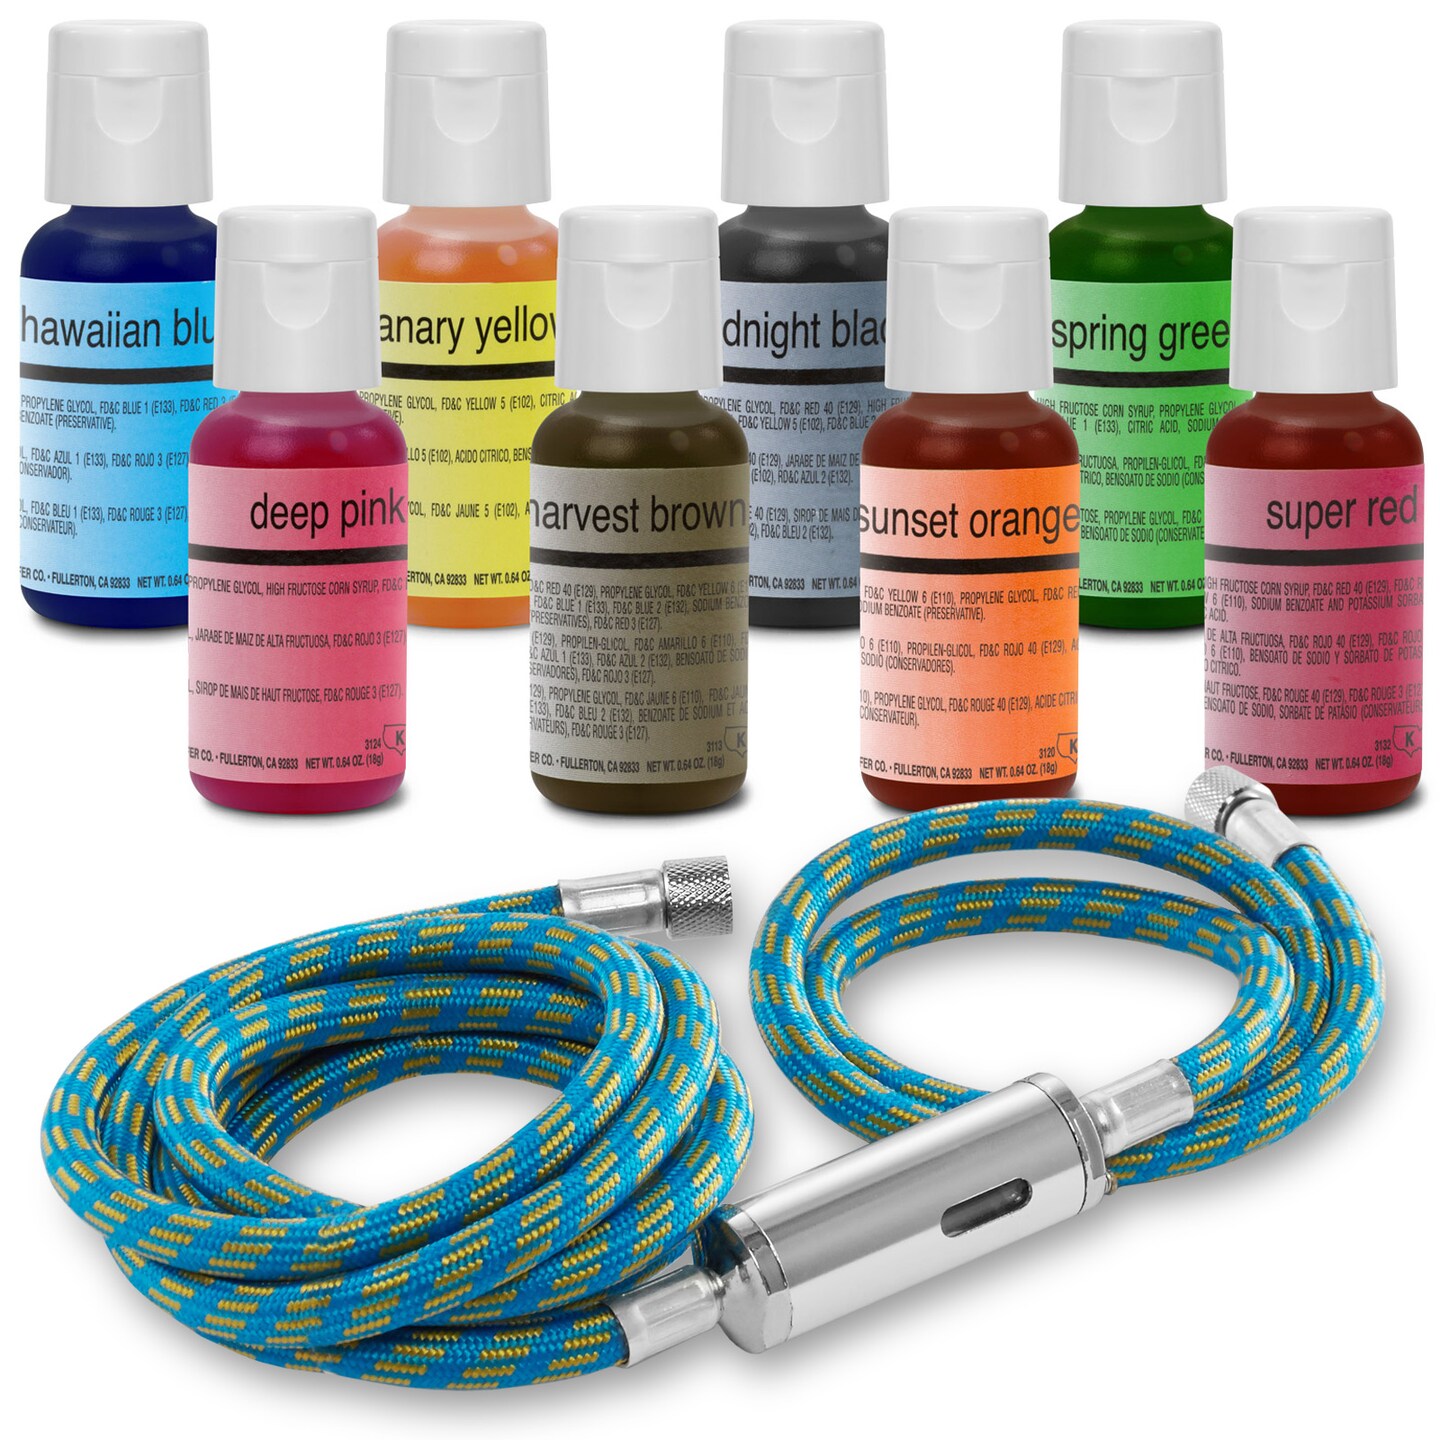 PointZero Airbrush Cake Decorating Kit - Airbrushing Set Includes Air Compressor, Hose, Gravity Feed Dual-Action Airbrush, Set of 8 Food Colors